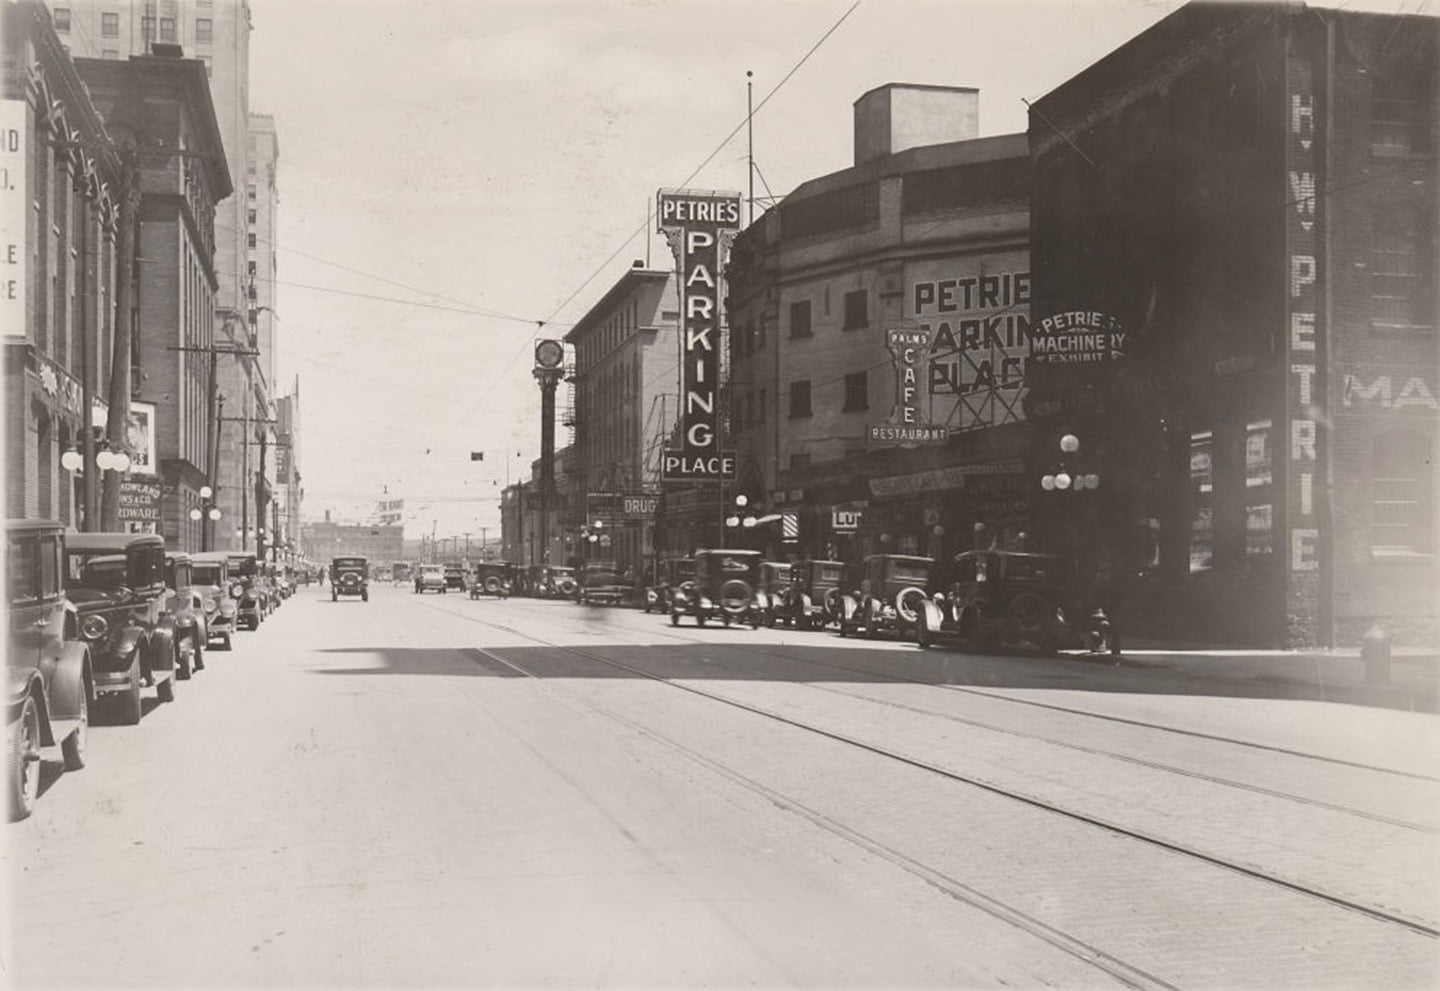 New sign for Petrie's Parking Place, 1929. The main part of the building, now converted into a parking garage, was built in 1887 as the Cyclorama. View is looking east on Front St. West from Simcoe St.